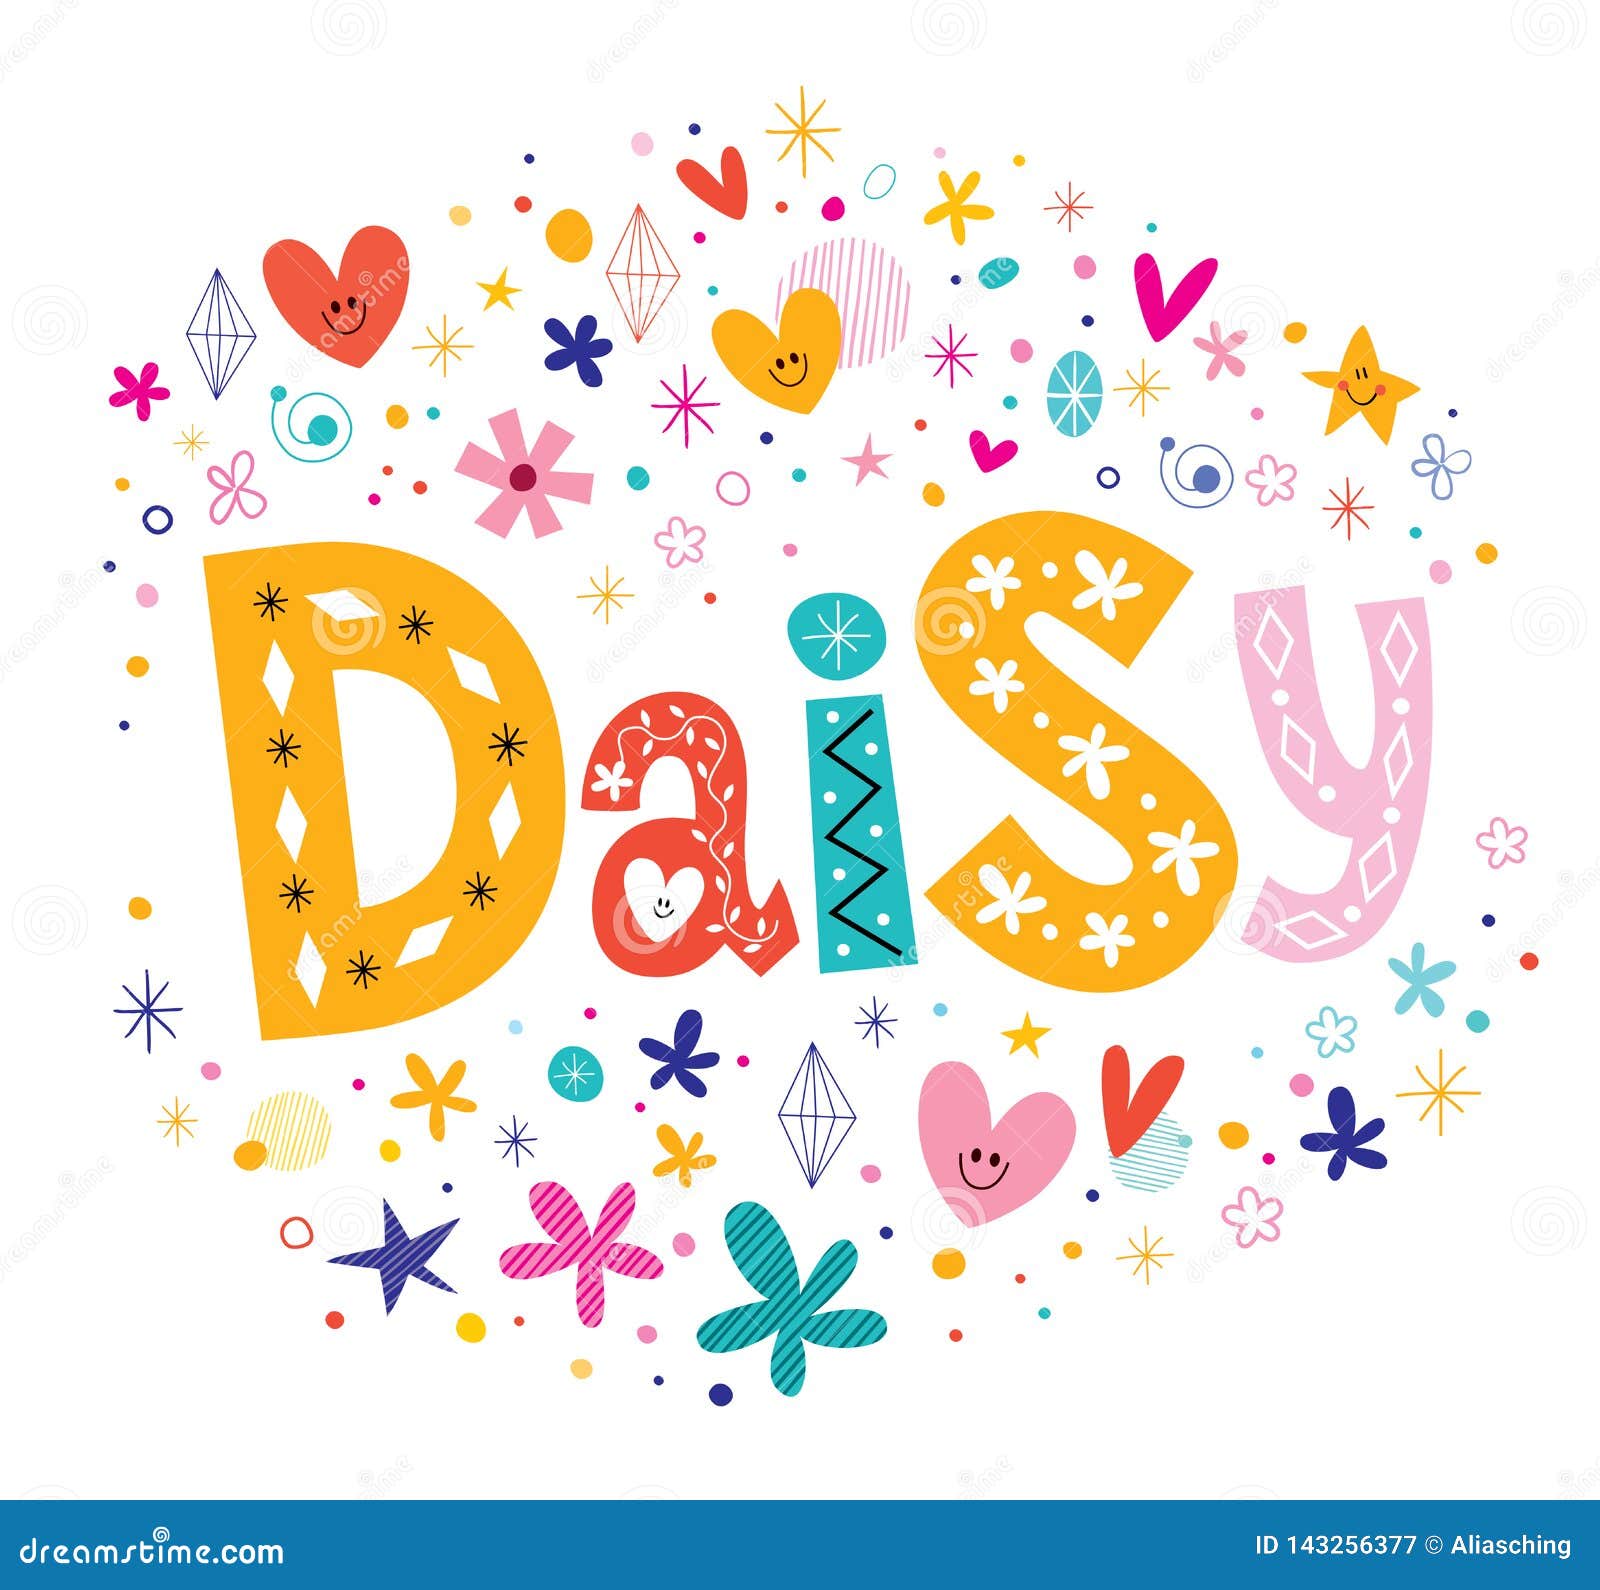 Daisy Girls Name Stock Vector Illustration Of Lady 143256377 Bright floral card with name naomi. https www dreamstime com daisy girls name daisy girls name decorative lettering type design image143256377